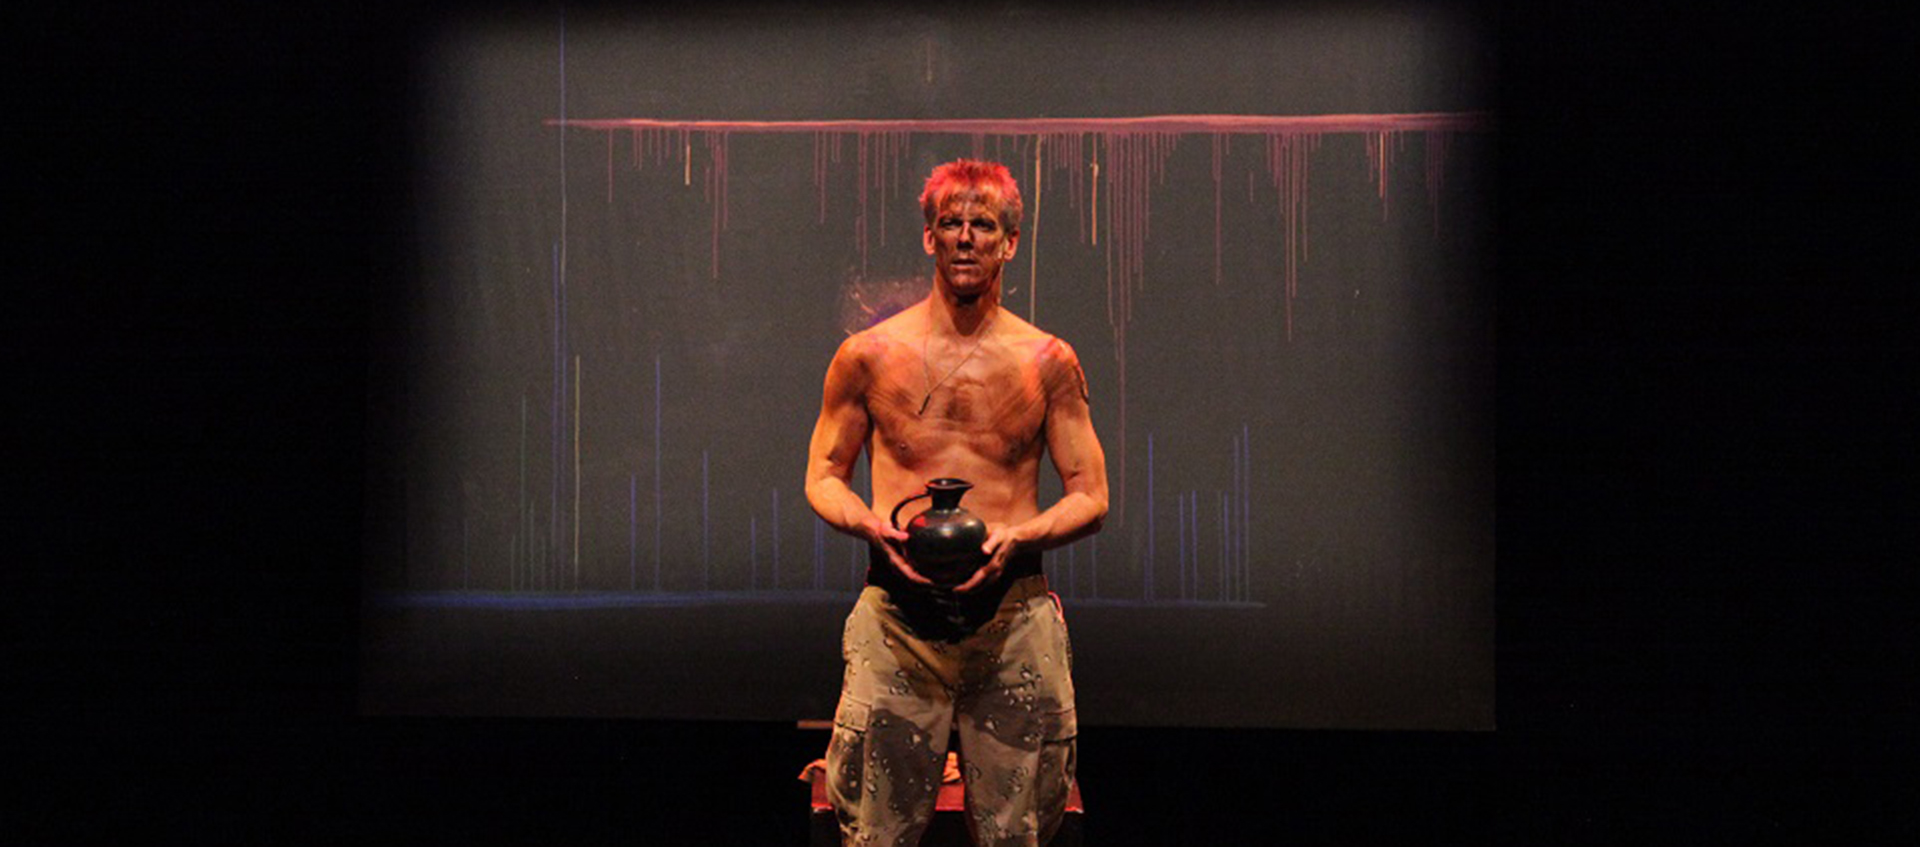 A tattered, shirtless man in camouflage pants holds a black vase on a red lit stage.